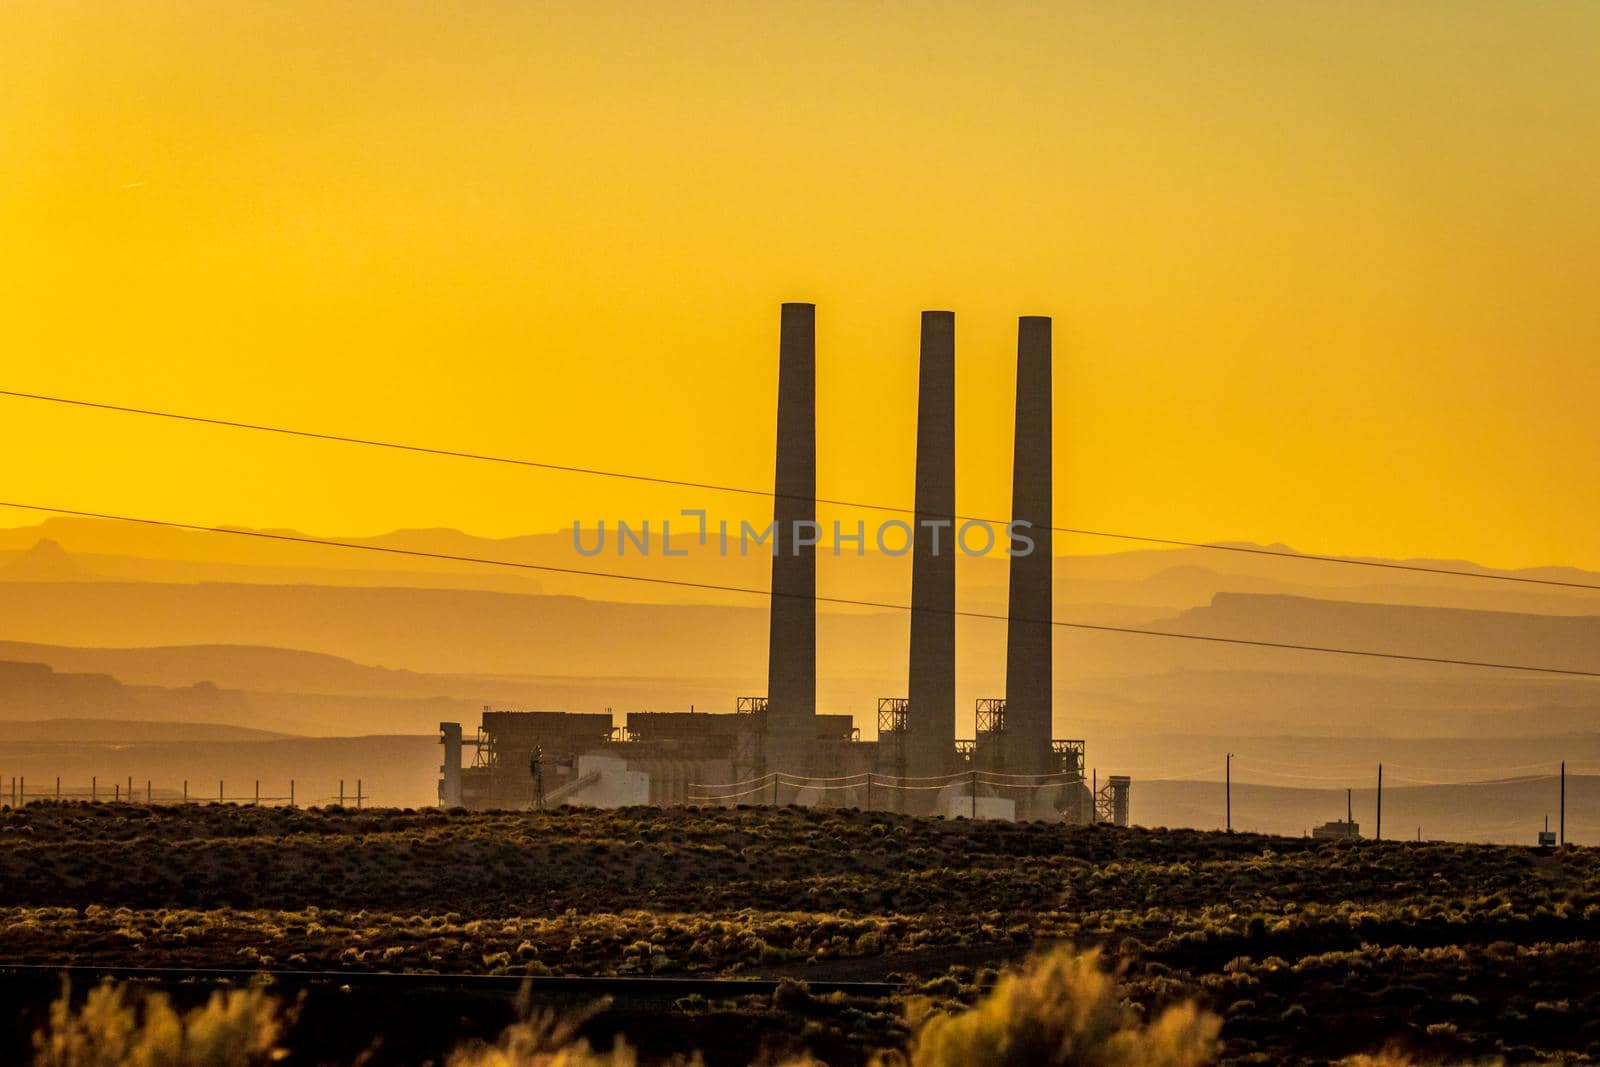 Navajo Generating Station is a coal-fired power plant located on the Navajo Nation, near Page, Arizona